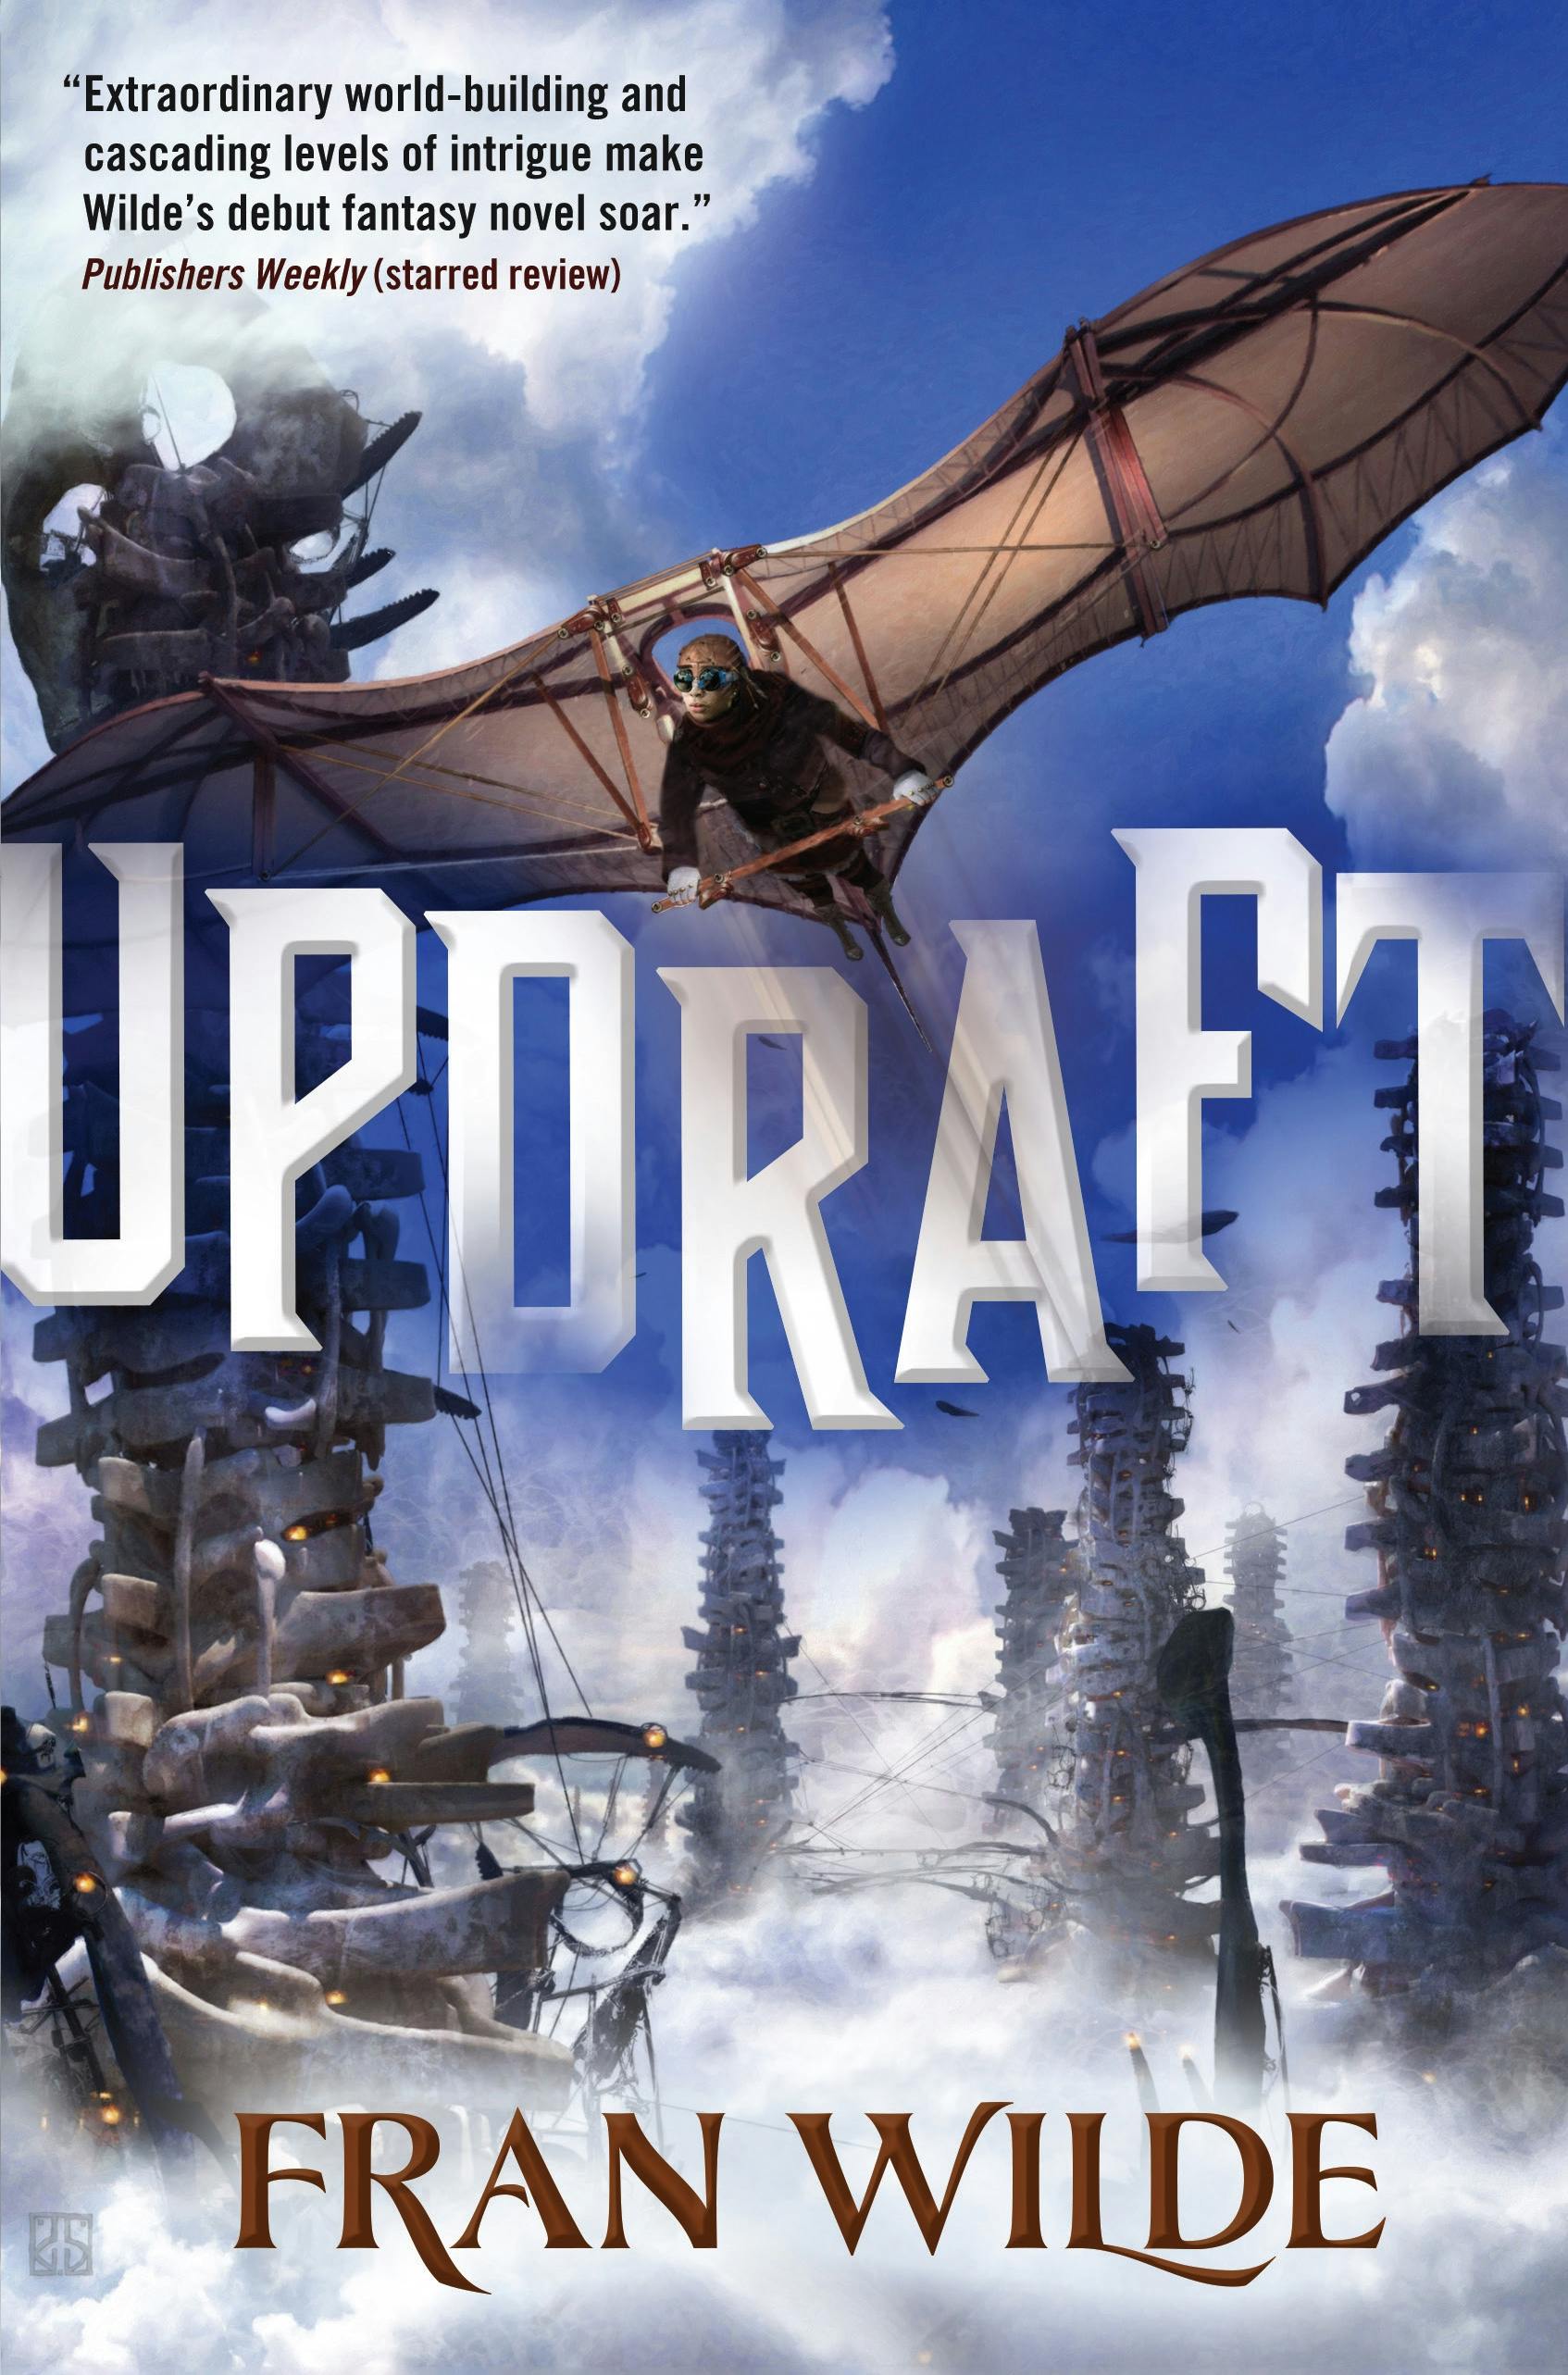 Cover for the book titled as: Updraft